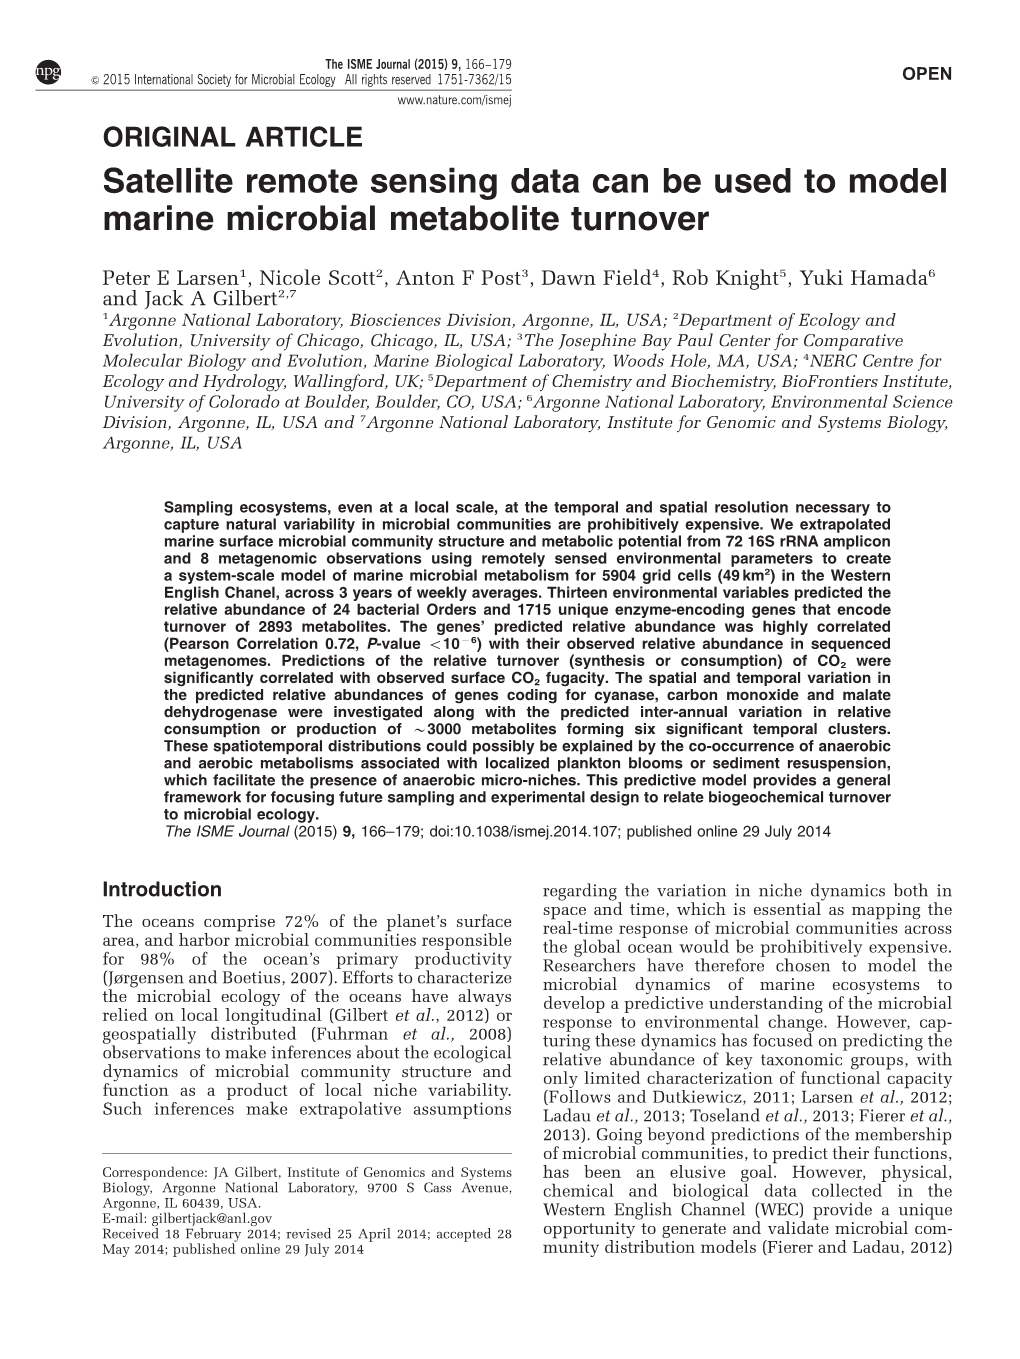 Satellite Remote Sensing Data Can Be Used to Model Marine Microbial Metabolite Turnover